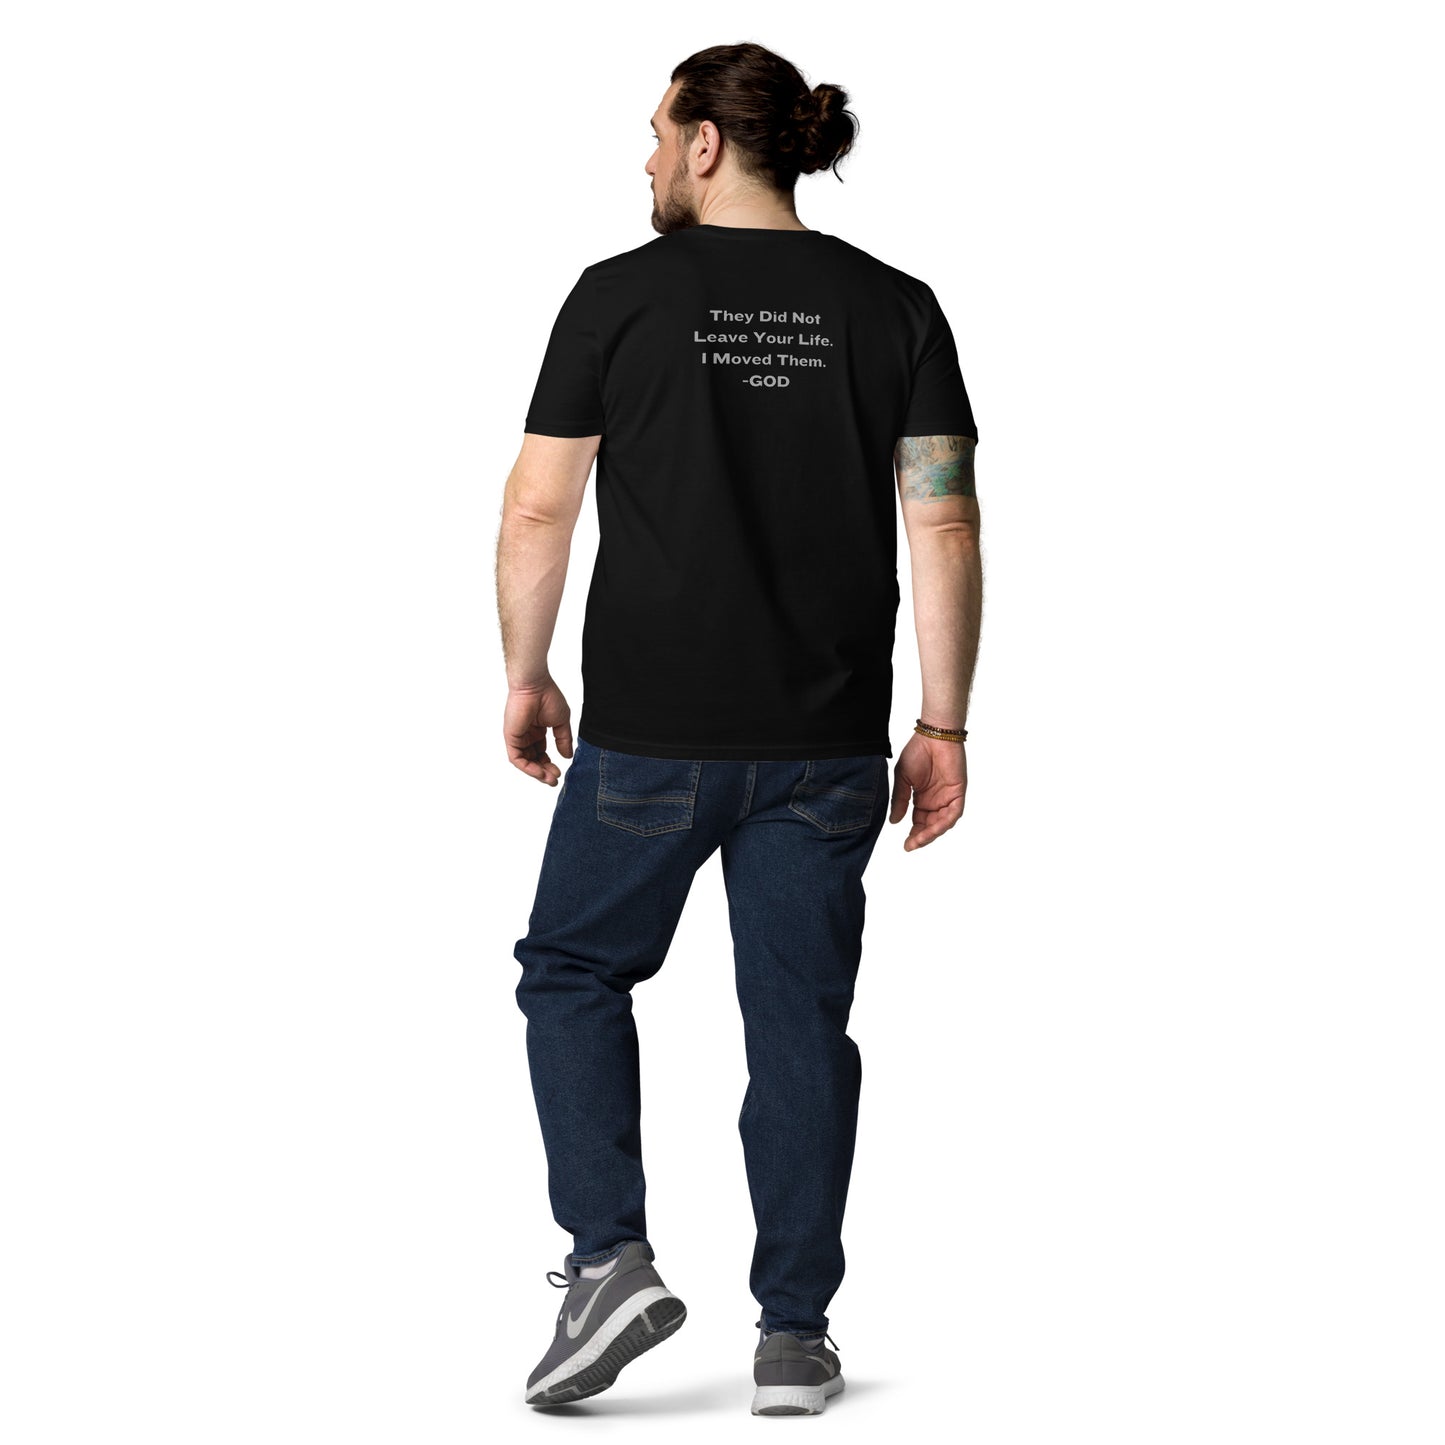 They Did Not Leave Your Life. I Moved Them. - GOD Men's Organic Cotton T-Shirt